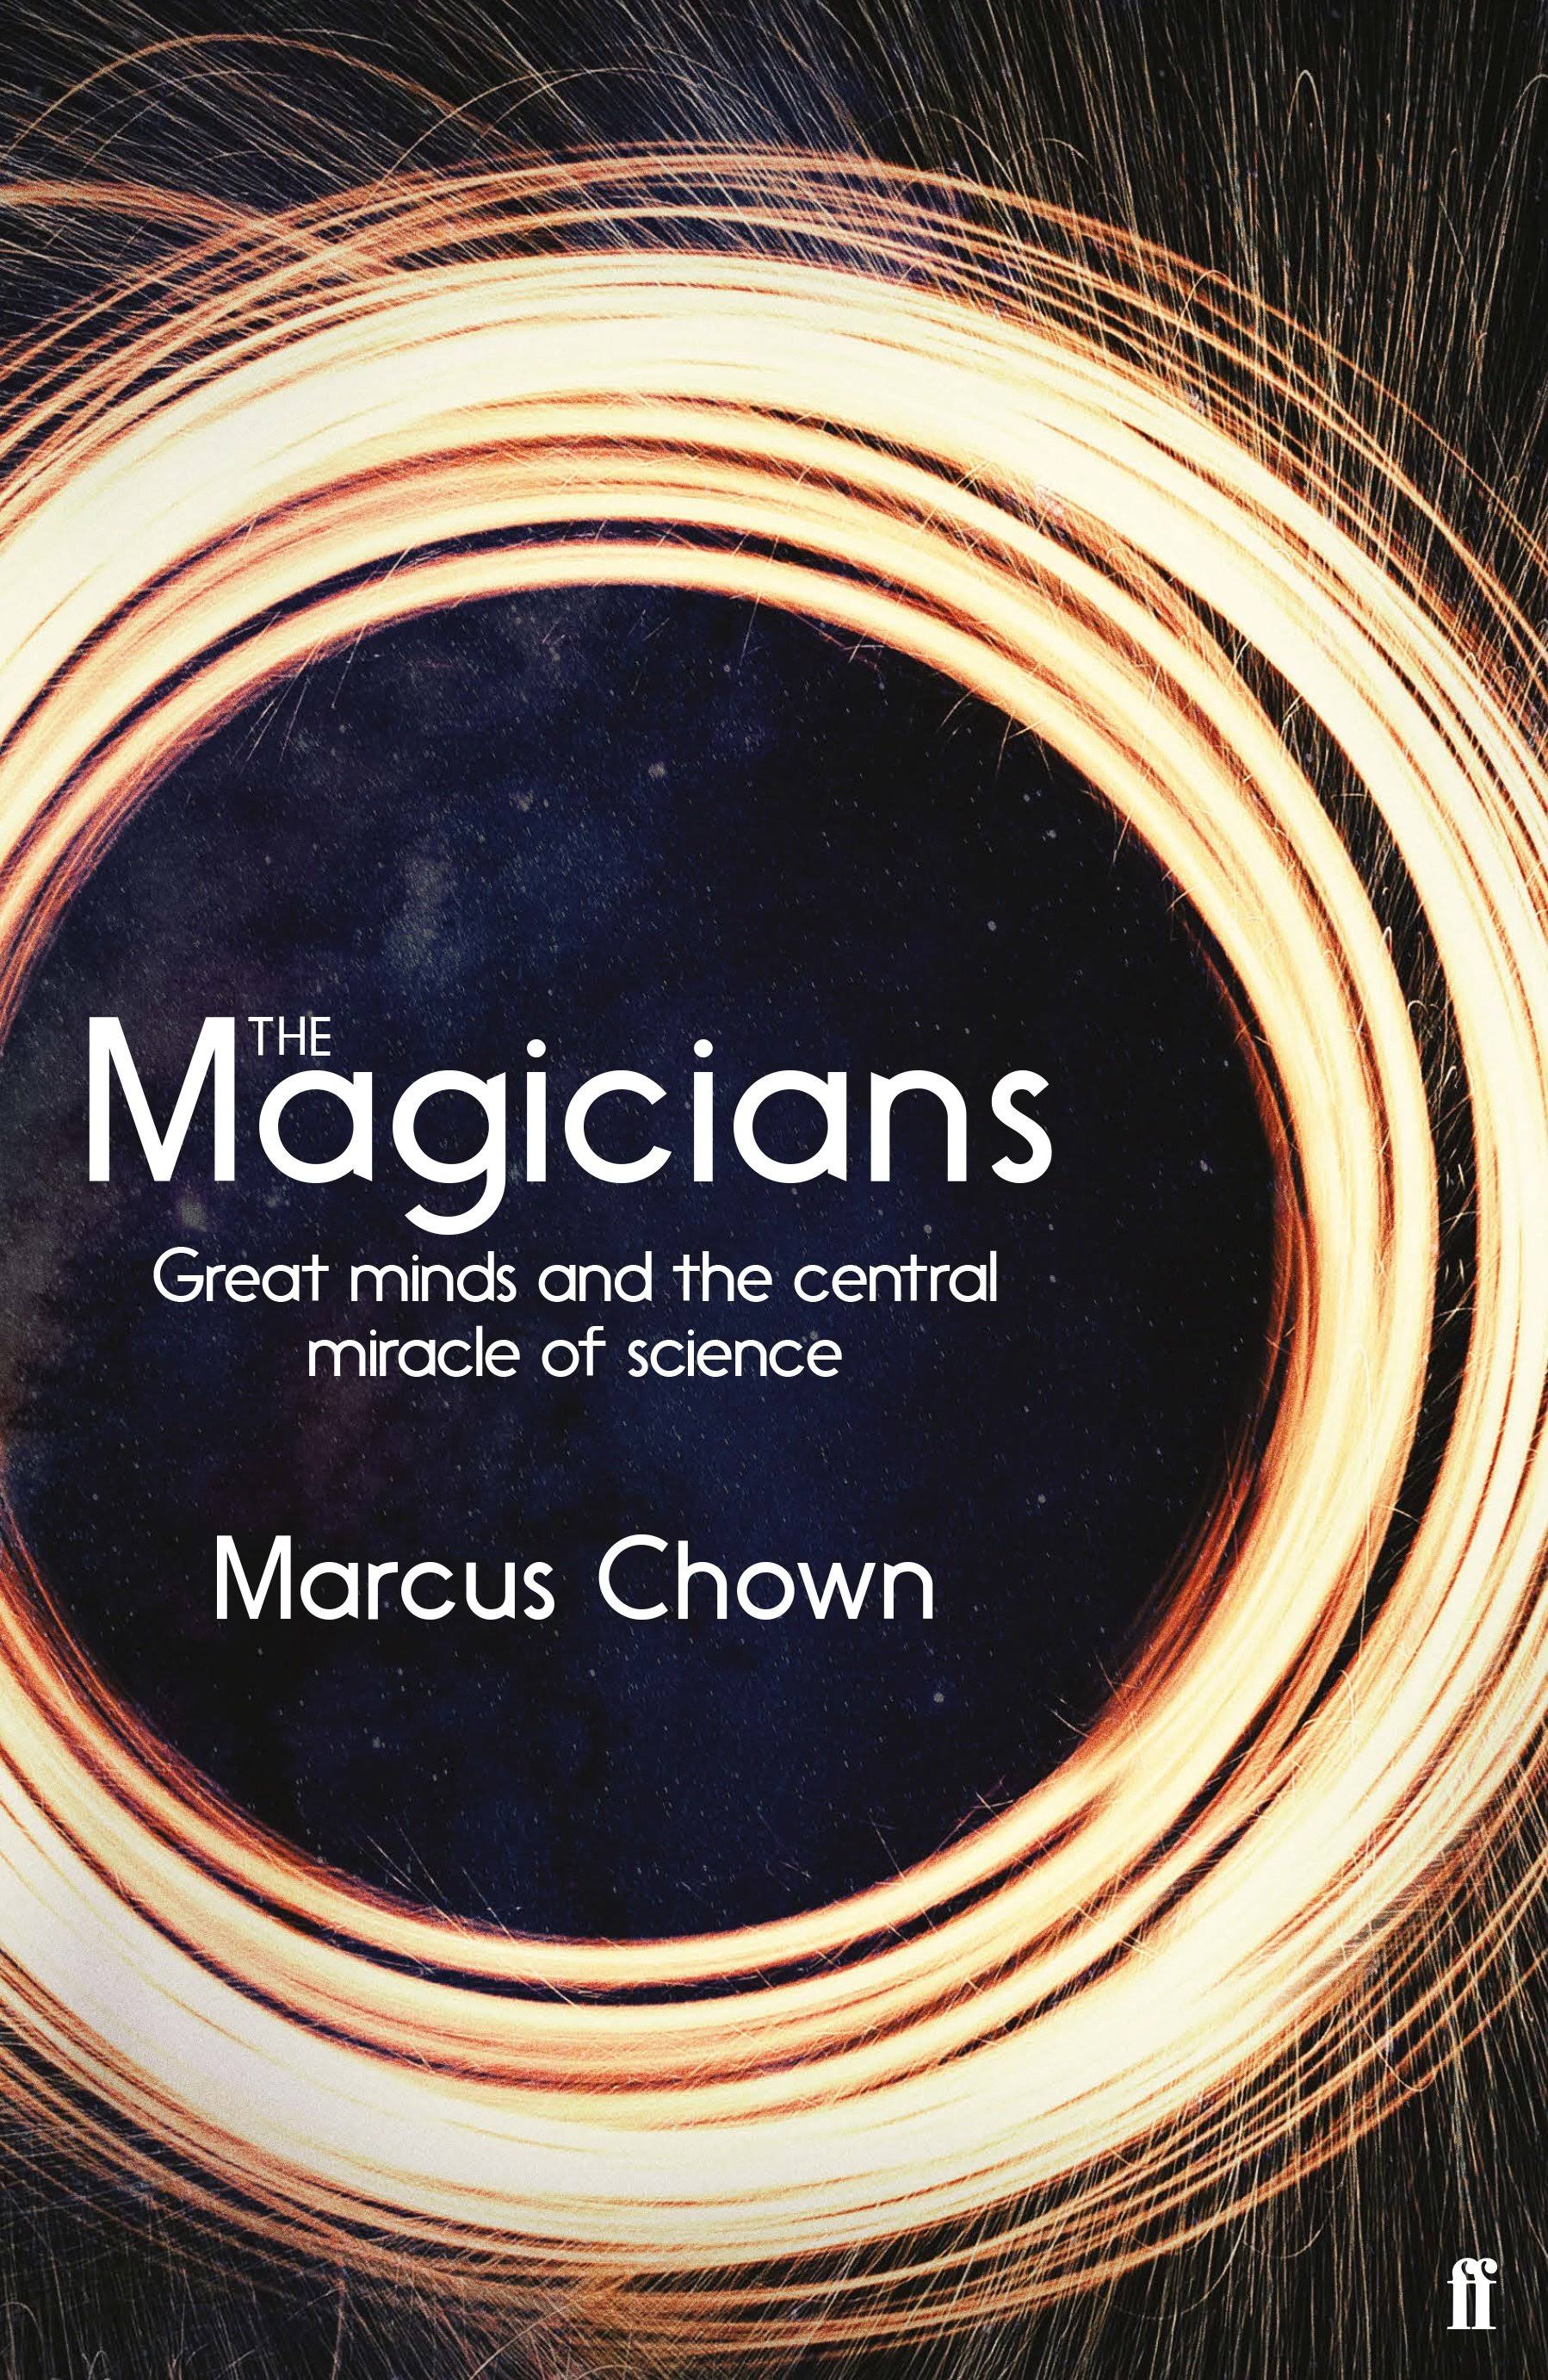 The Magicians by Marcus Chown